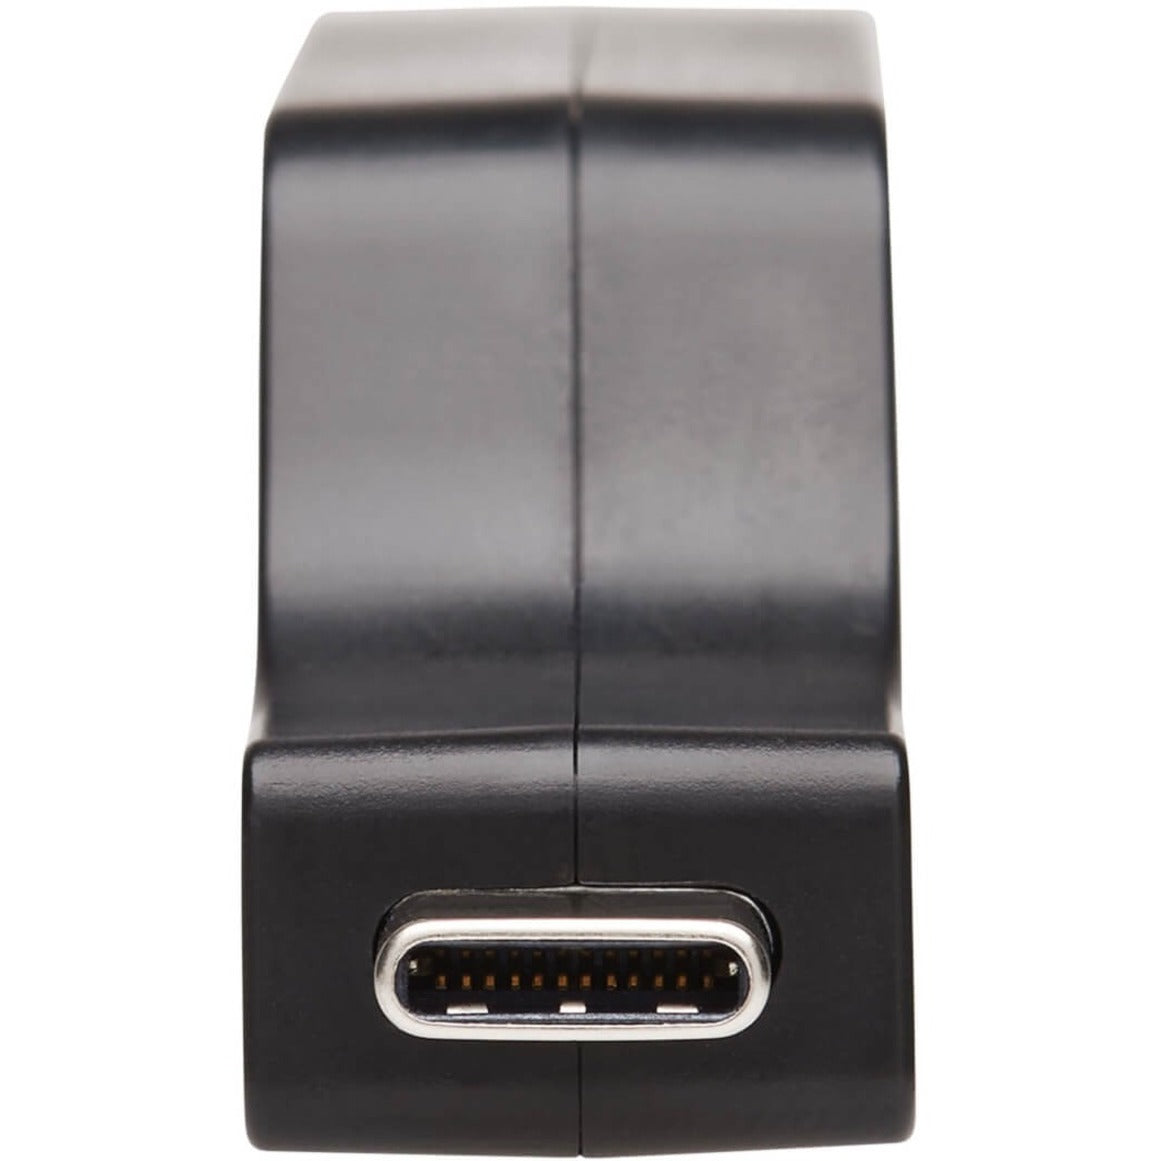 Tripp Lite U436-000-GB USB-C to Gigabit Ethernet Adapter, High-Speed Internet Connection for Computers, Notebooks, and Tablets